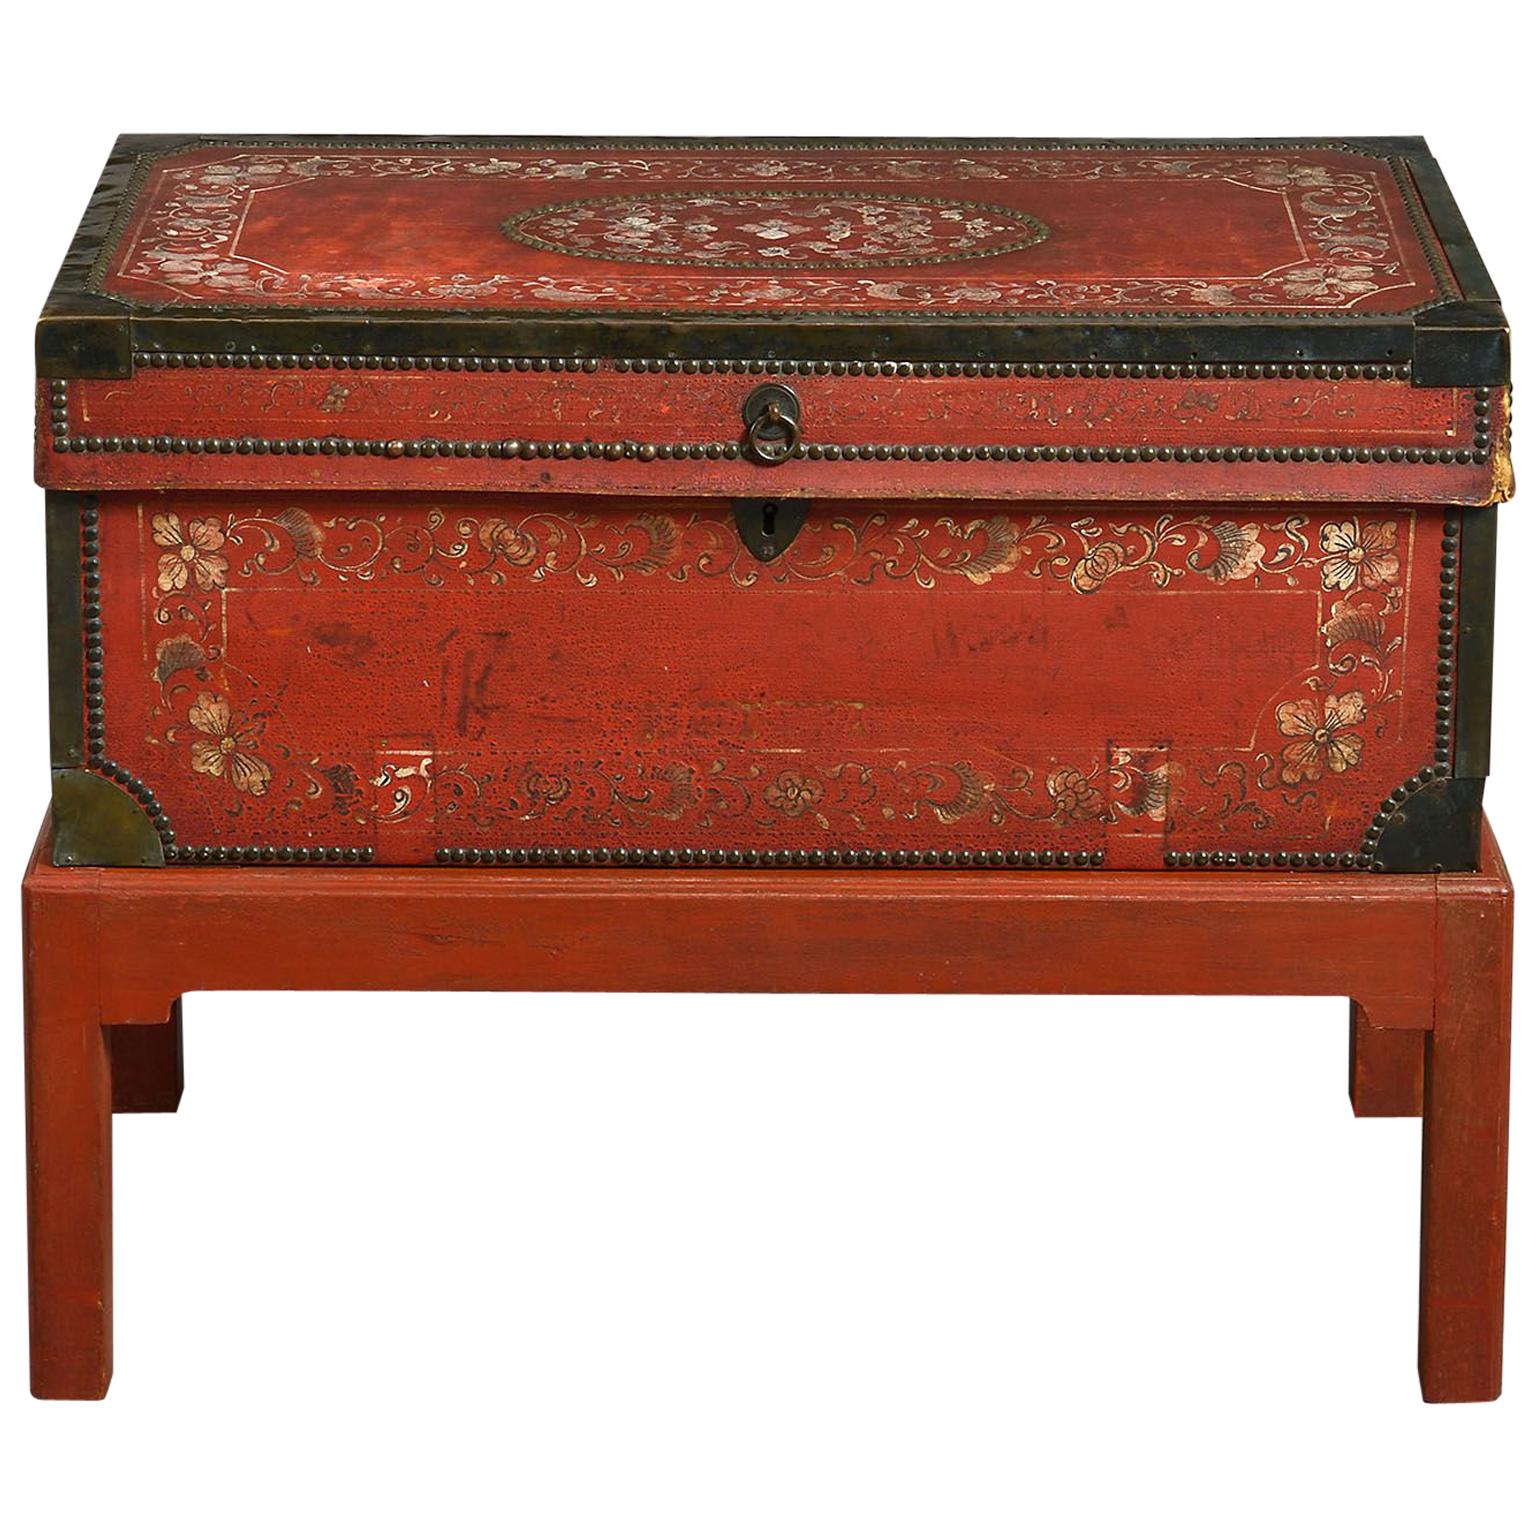 18th Century Chinese Export Painted Leather Trunk